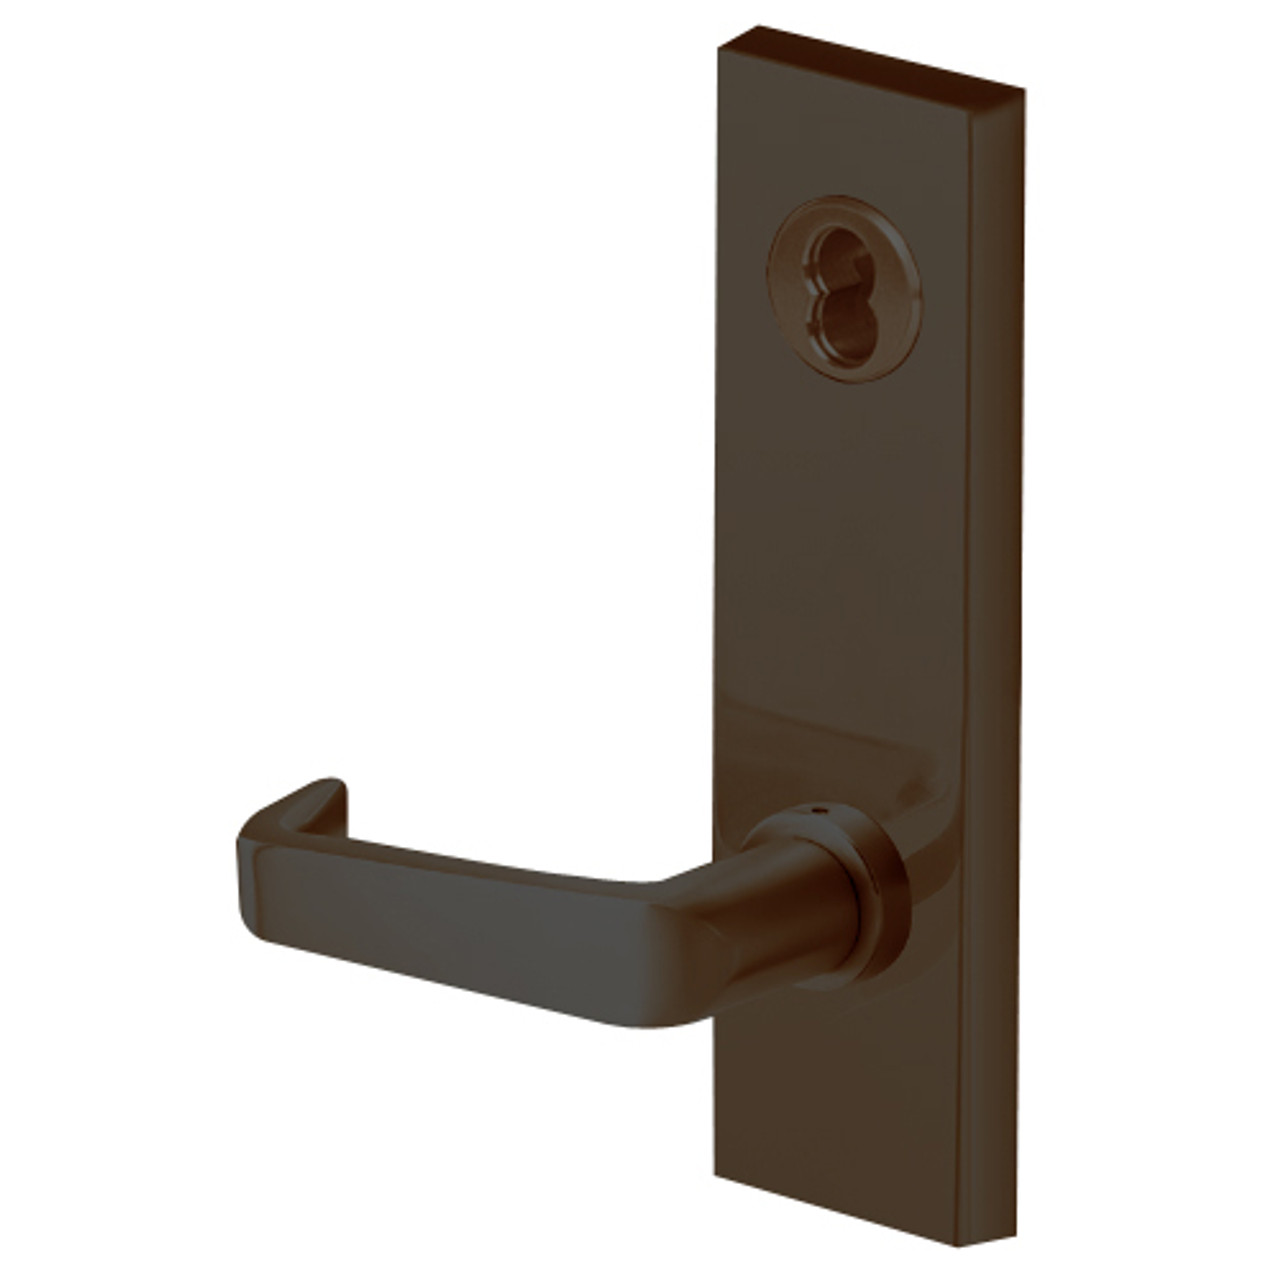 45HW7TWEL15M613 Best 40HW series Double Key Deadbolt Fail Safe Electromechanical Mortise Lever Lock with Contour w/ Angle Return Style in Oil Rubbed Bronze